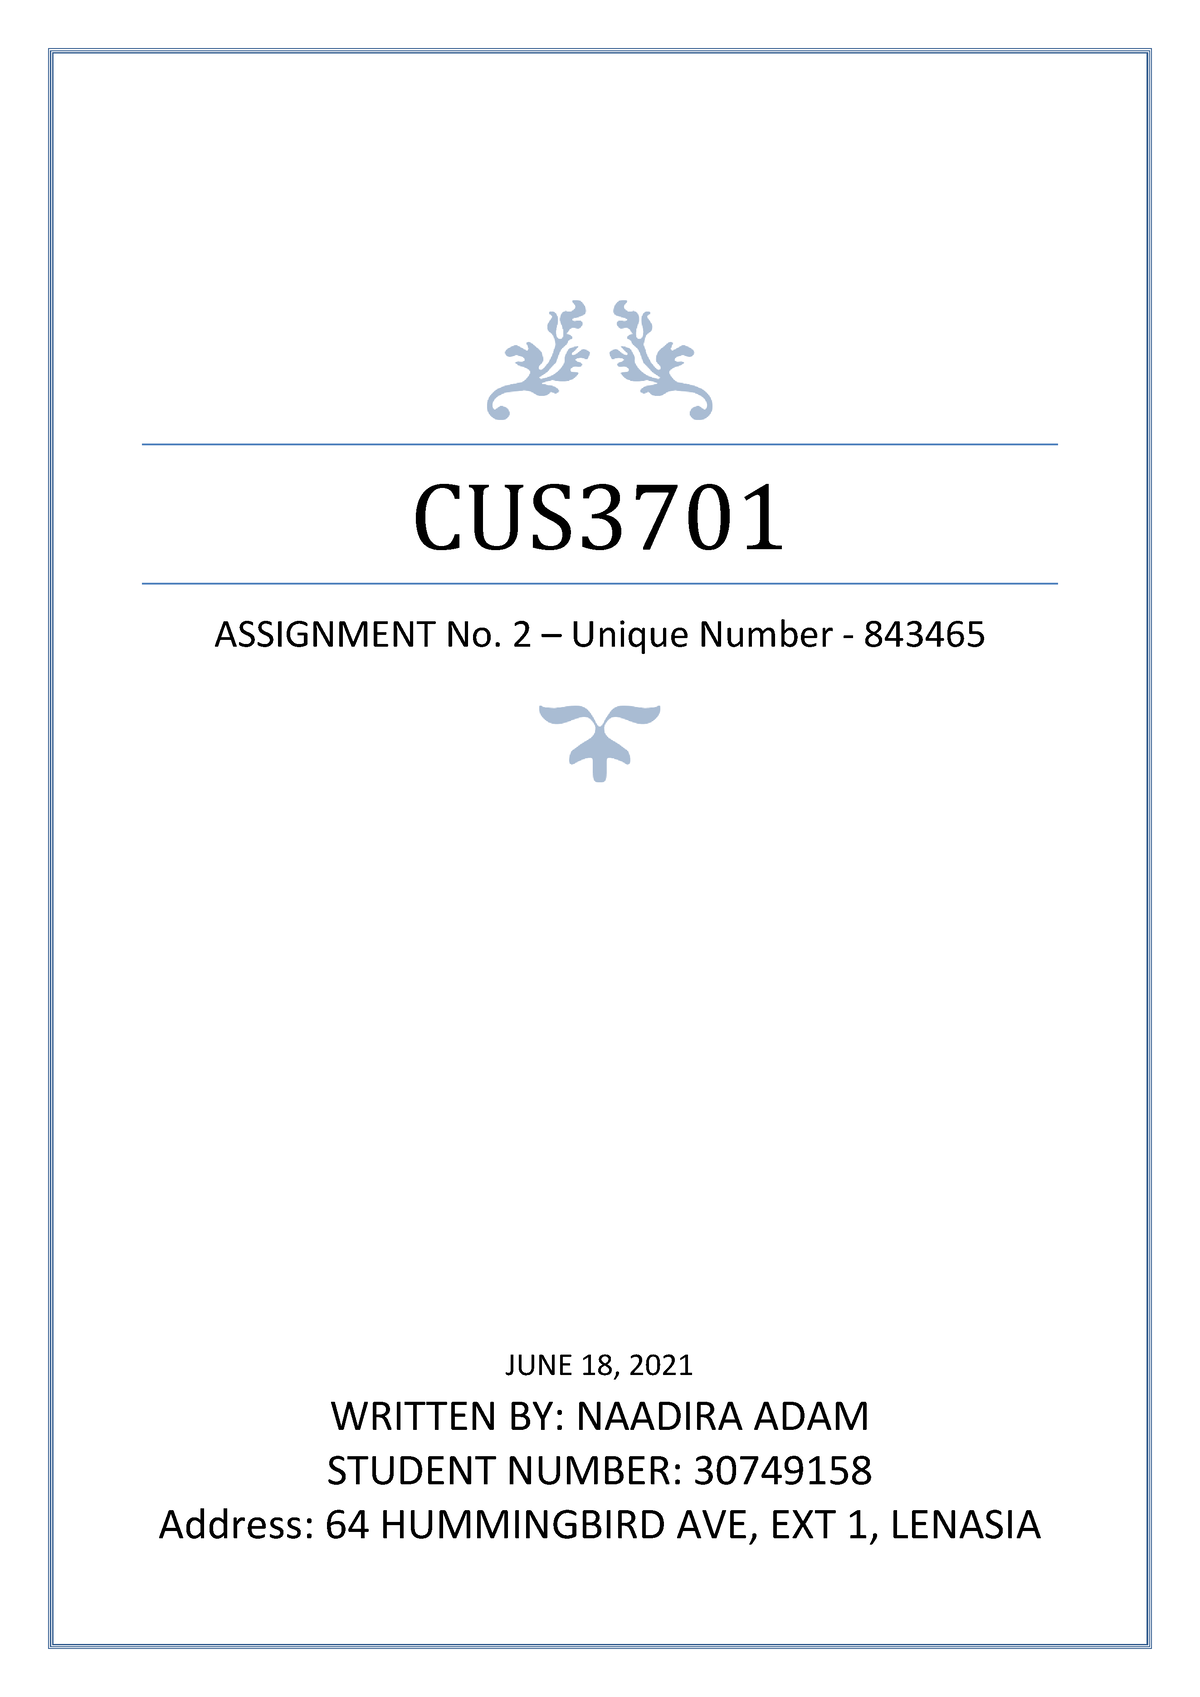 cus3701 assignment 2 answers pdf download